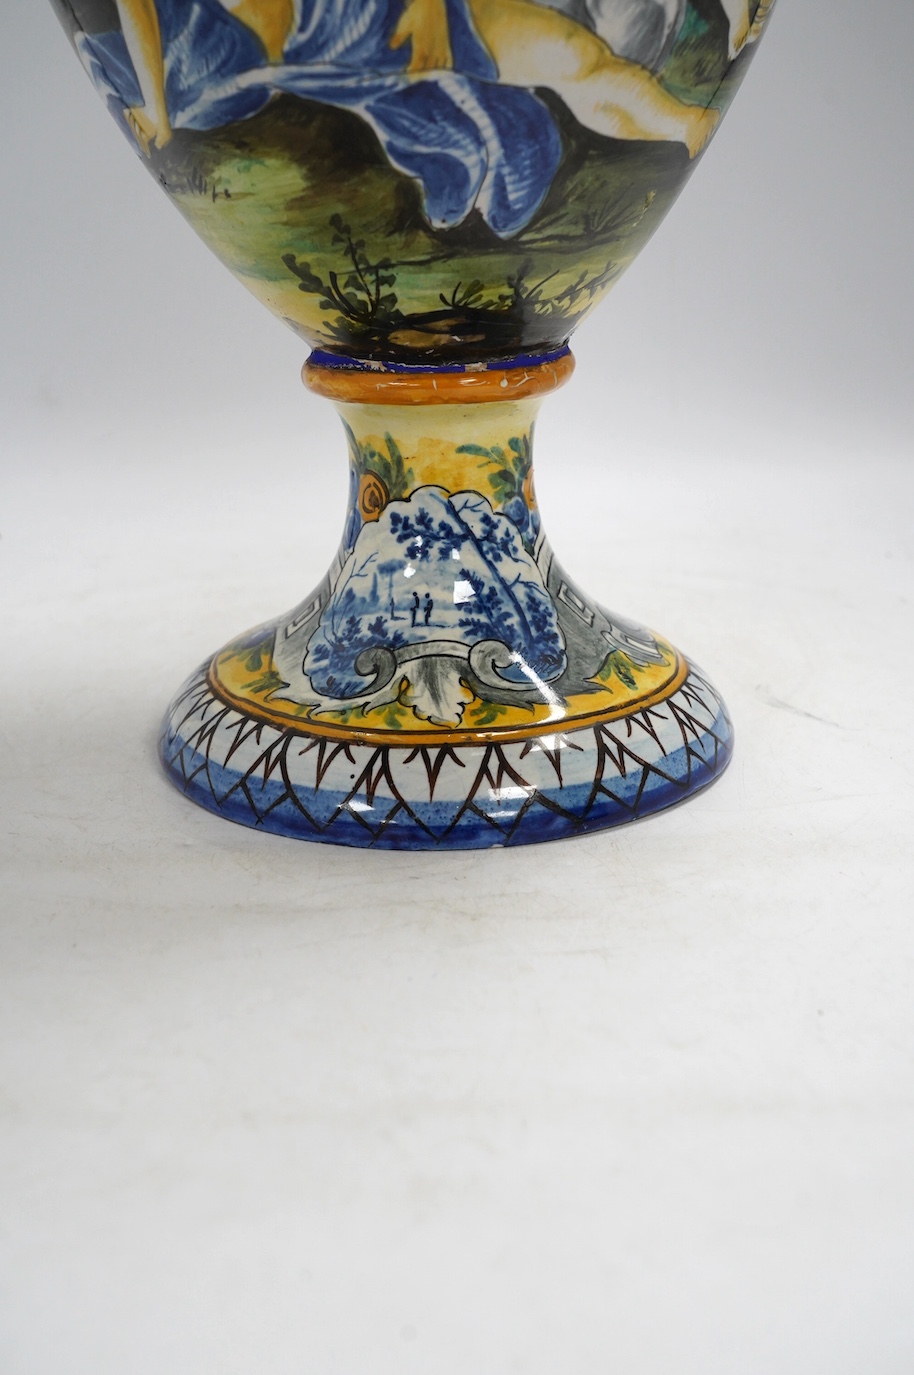 A tall late 19th/early 20th century Italian maiolica vase in Cantagalli style, with blue ‘M’ and crown mark, 66cm. Condition - poor